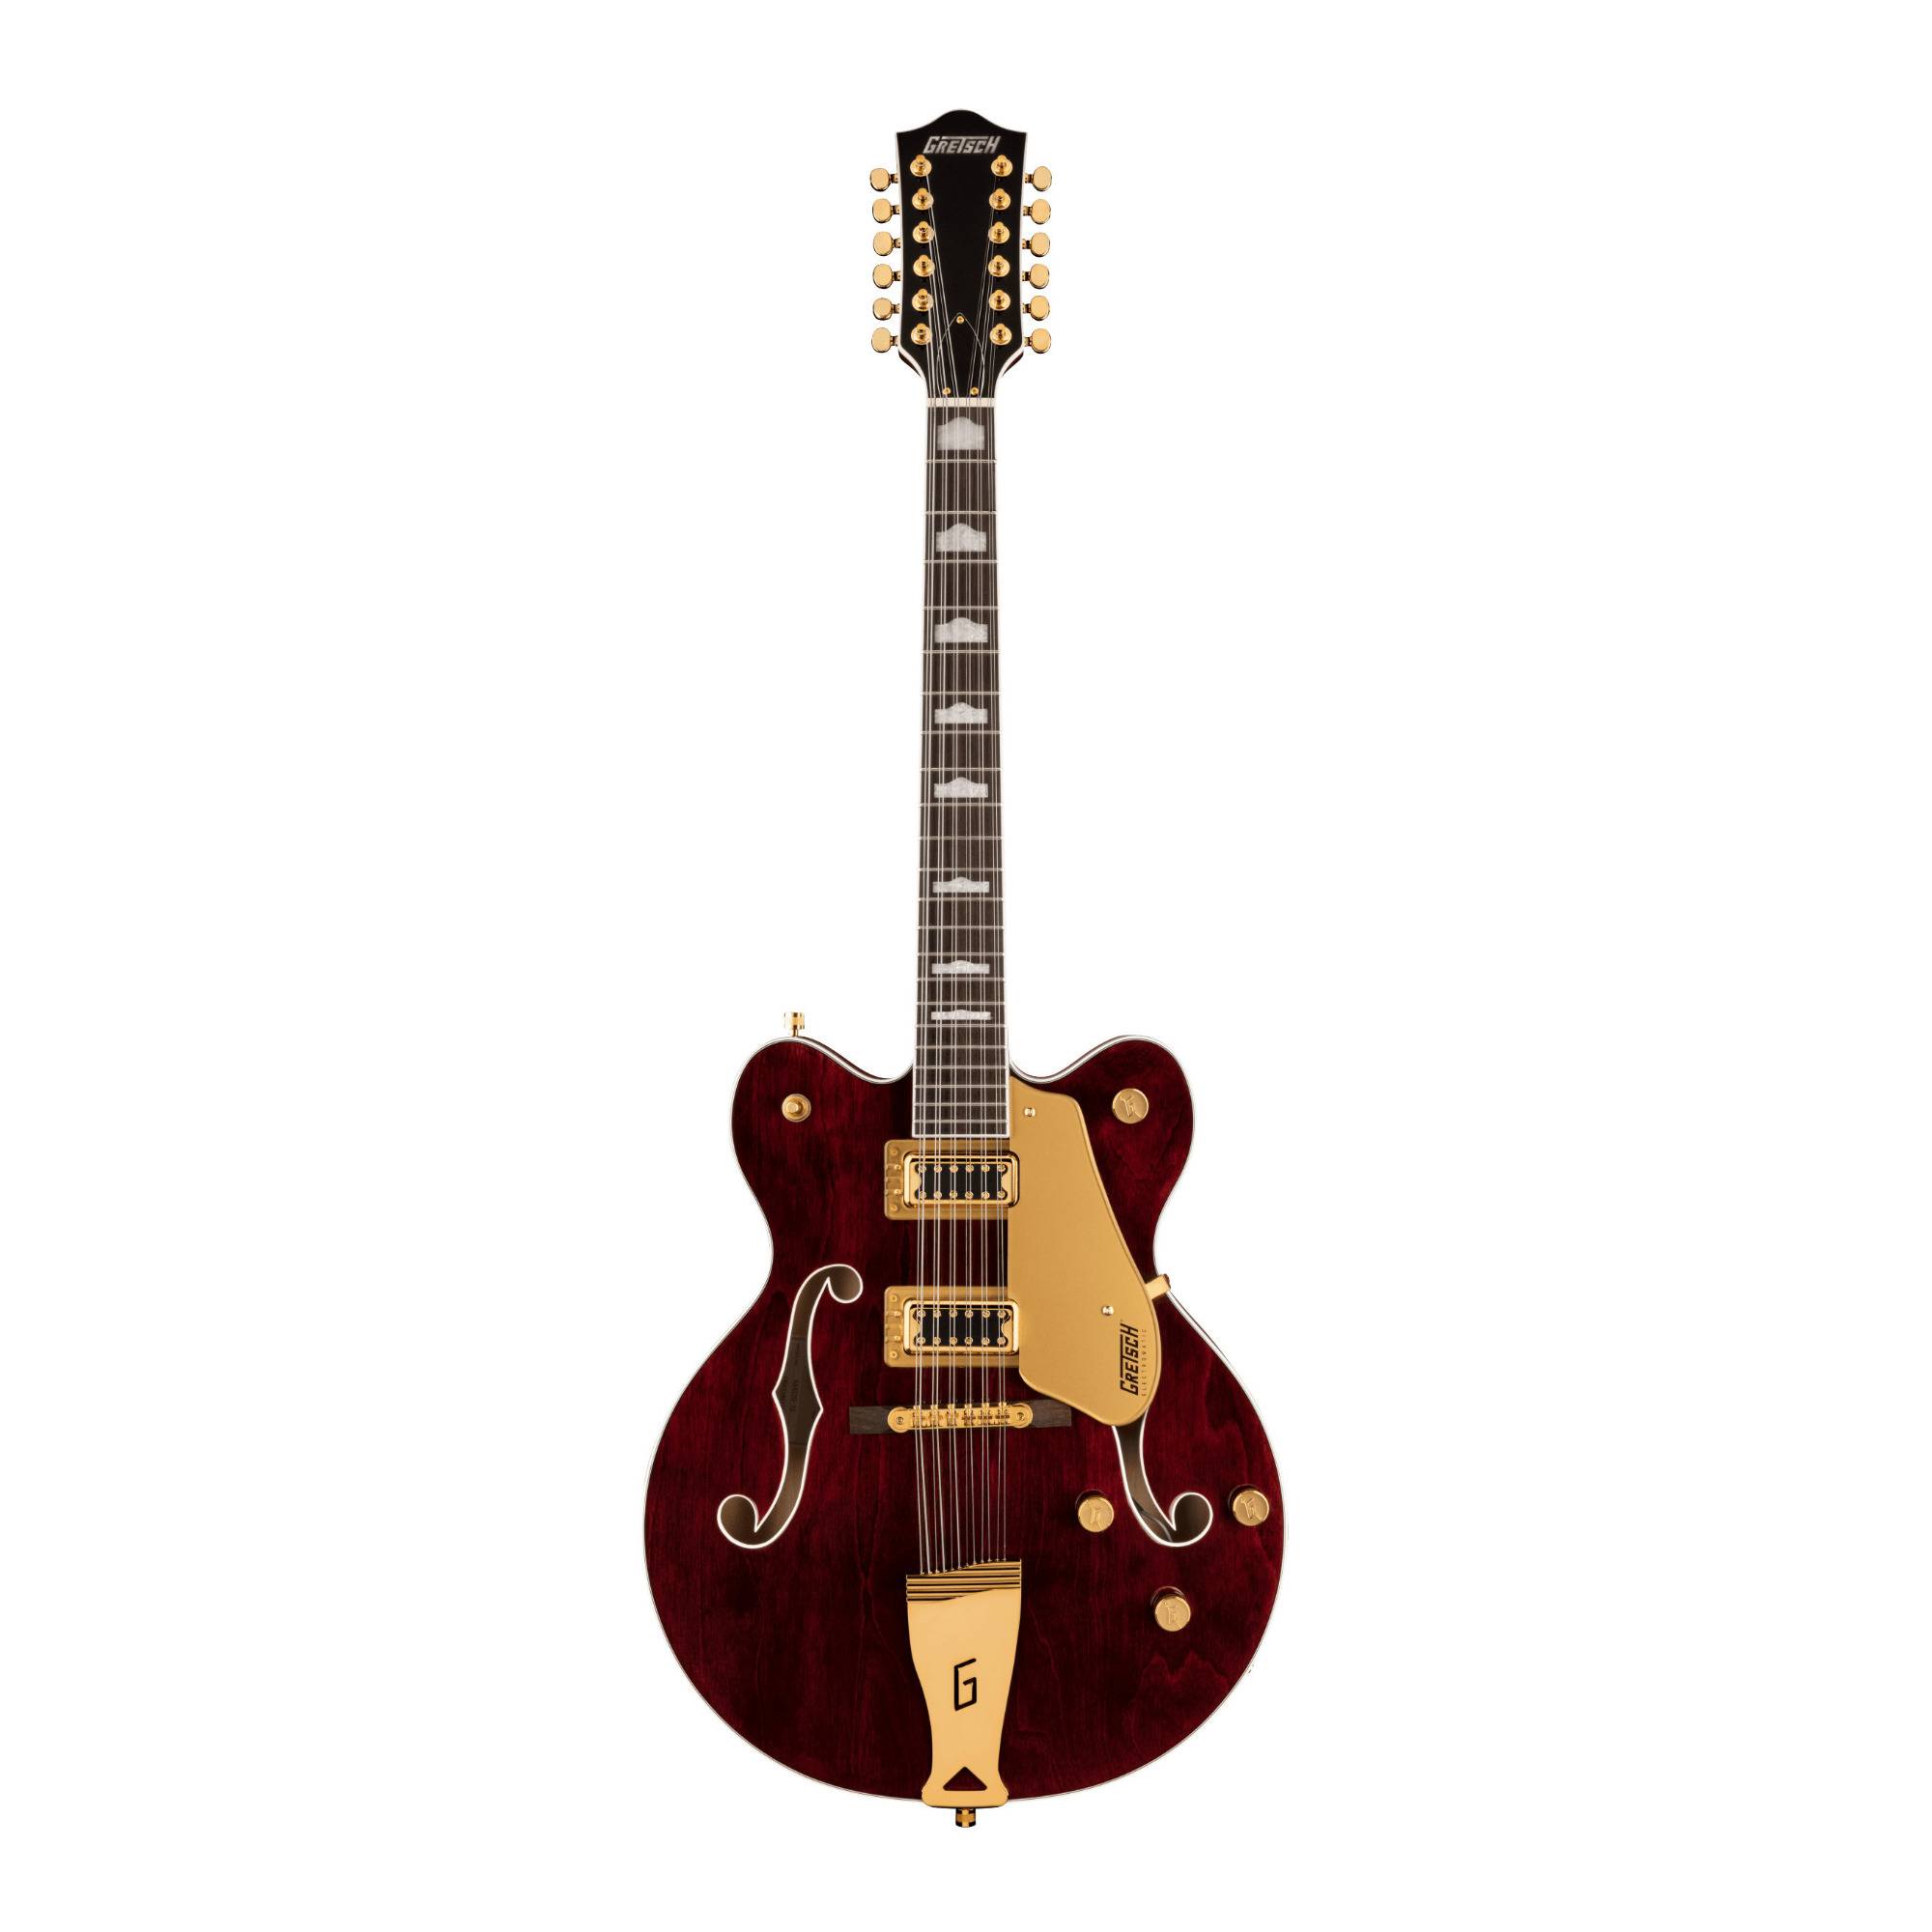 Gretsch G5422G-12 Electromatic Double-Cut 12-String Guitar (Right-Handed, Walnut Stain)